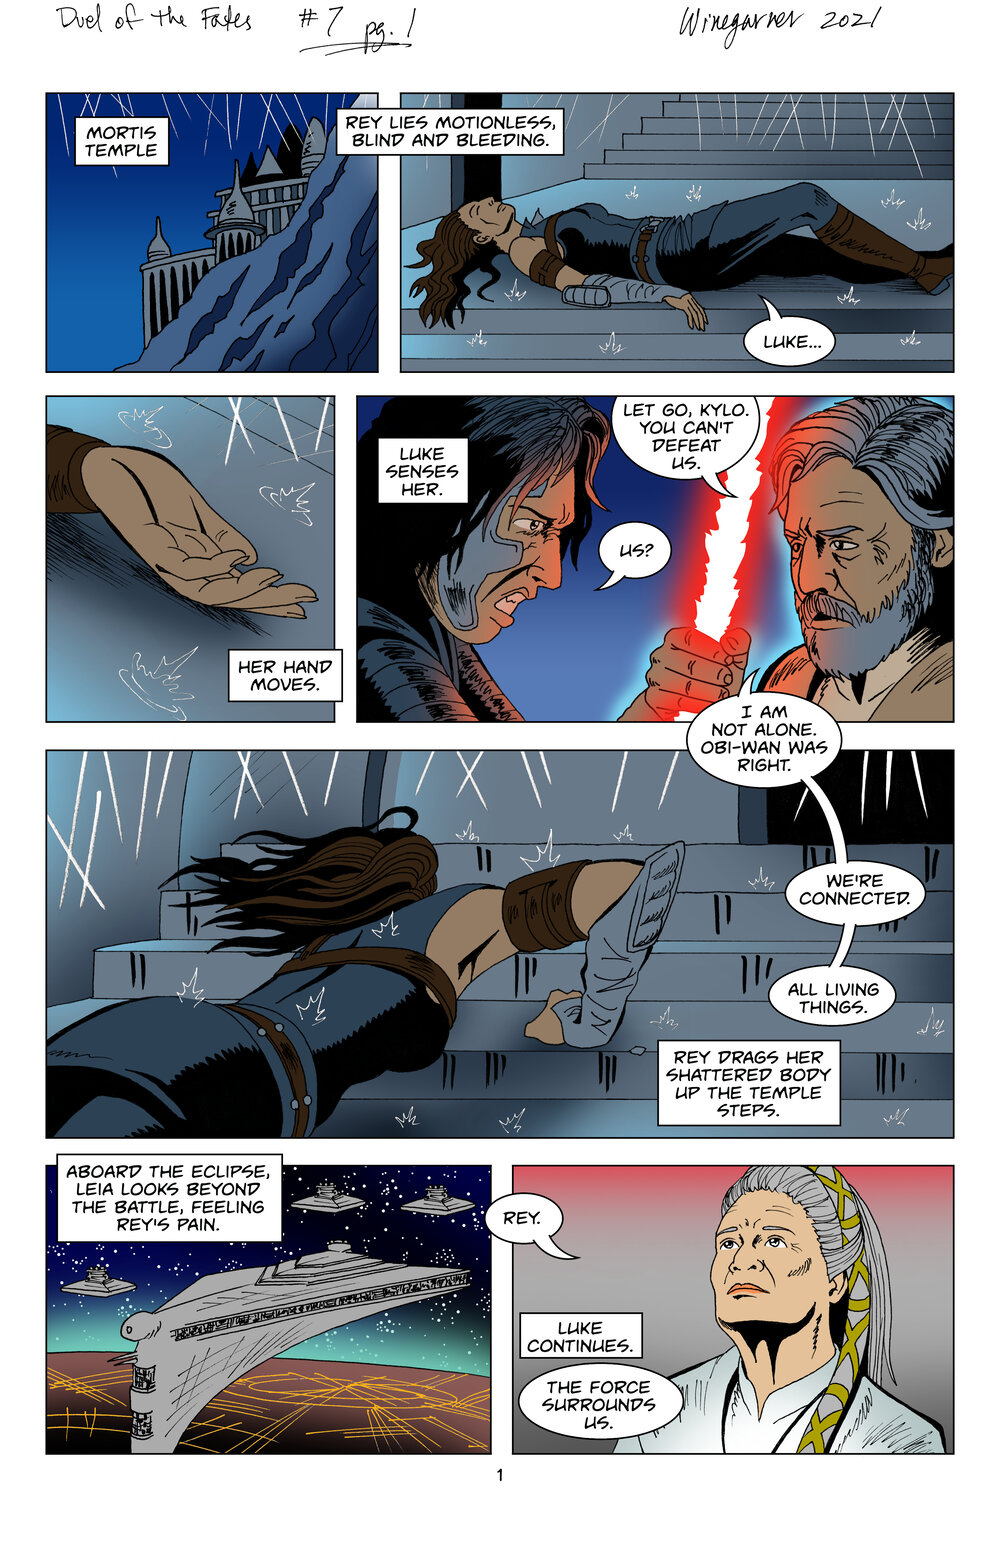 Star Wars: Duel of the Fates (2020-2021): Chapter 7 - Page 2